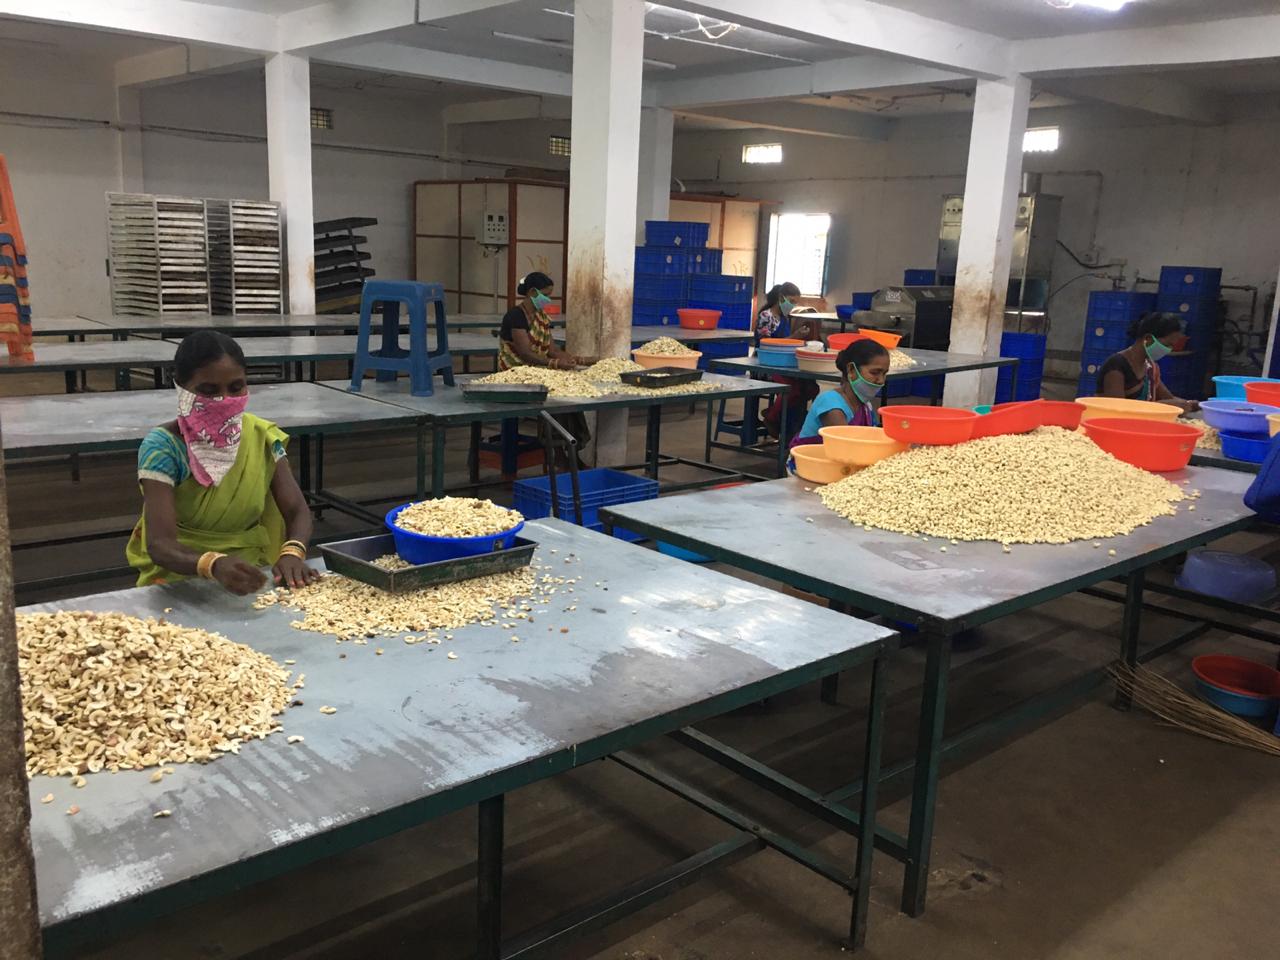 Odisha Cashew Processors Urge Govt To Increase Cultivation, Include Cashew In MDM & Treat Cashew Processing Workers On Par with Tendu Leaf Pluckers